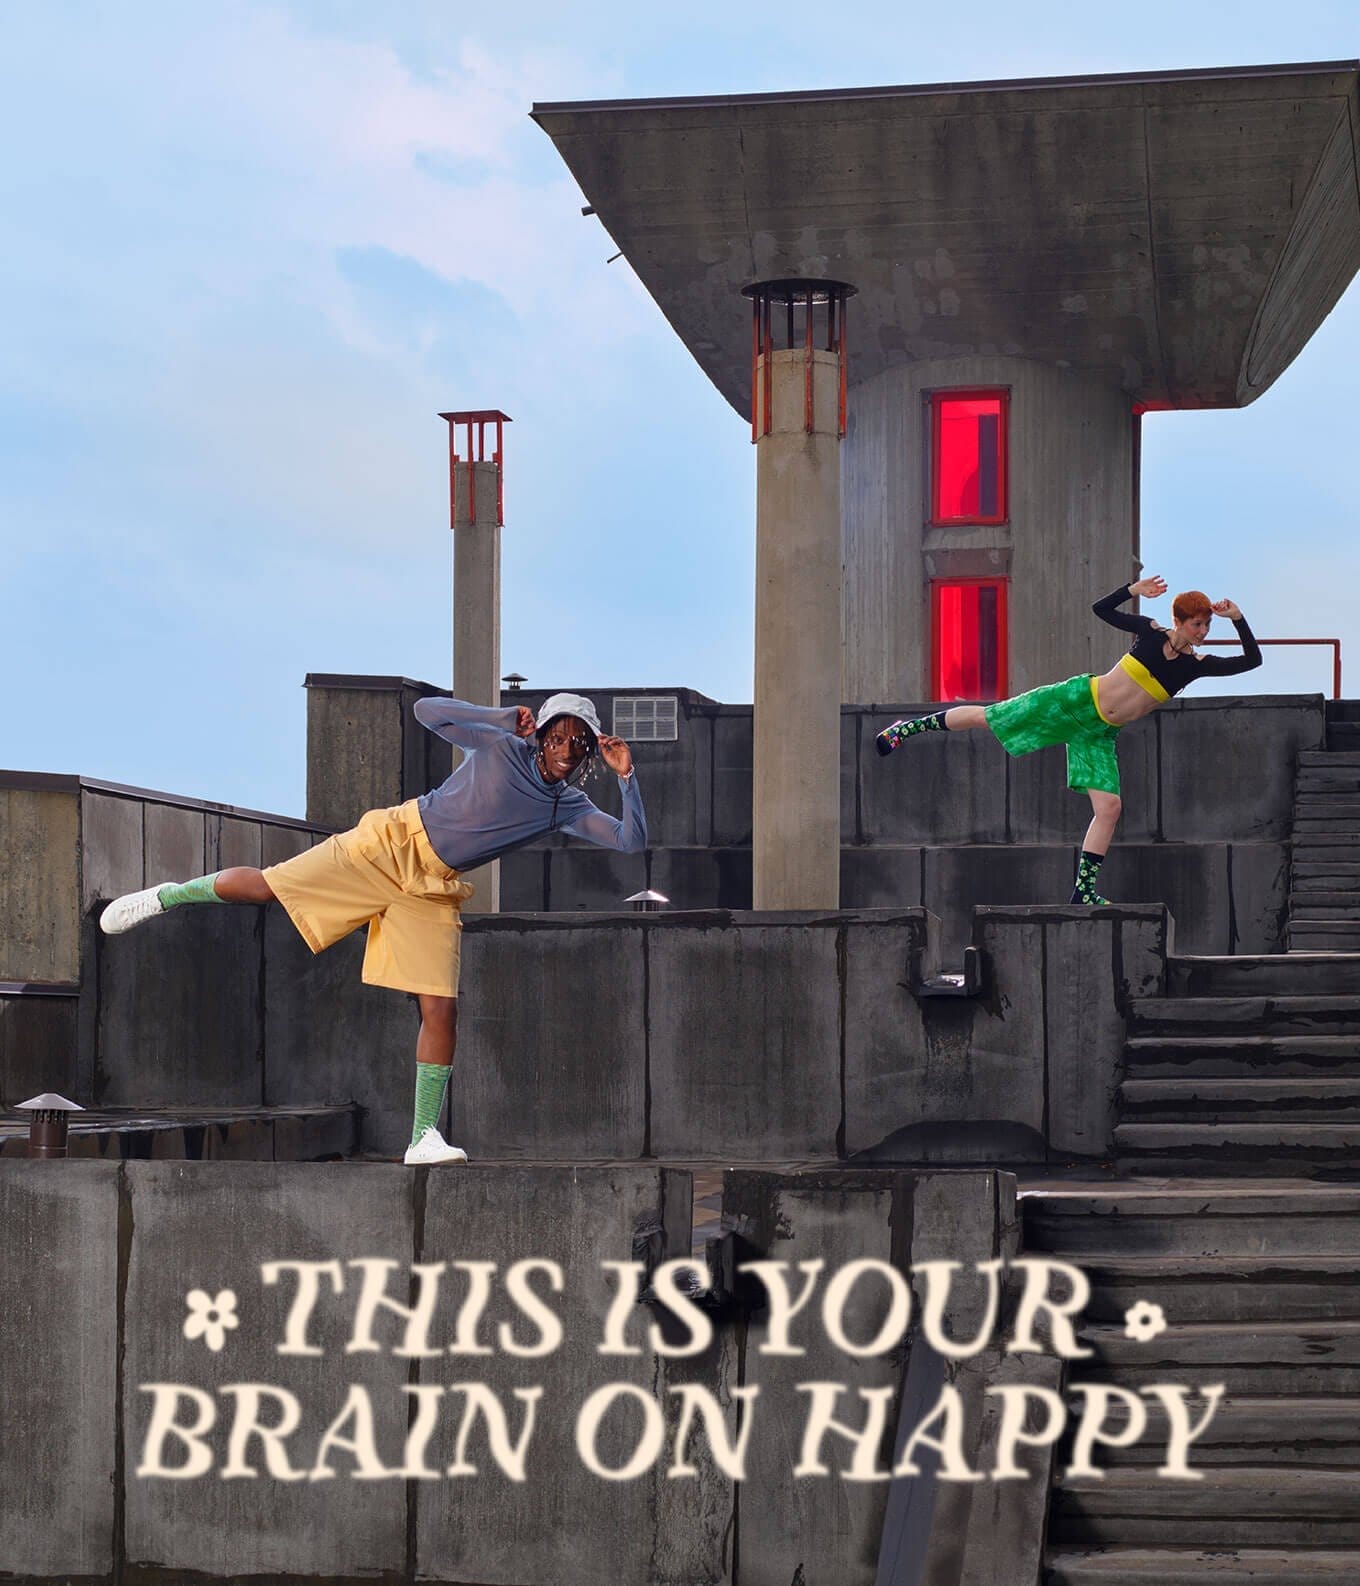 This is your brain on happy